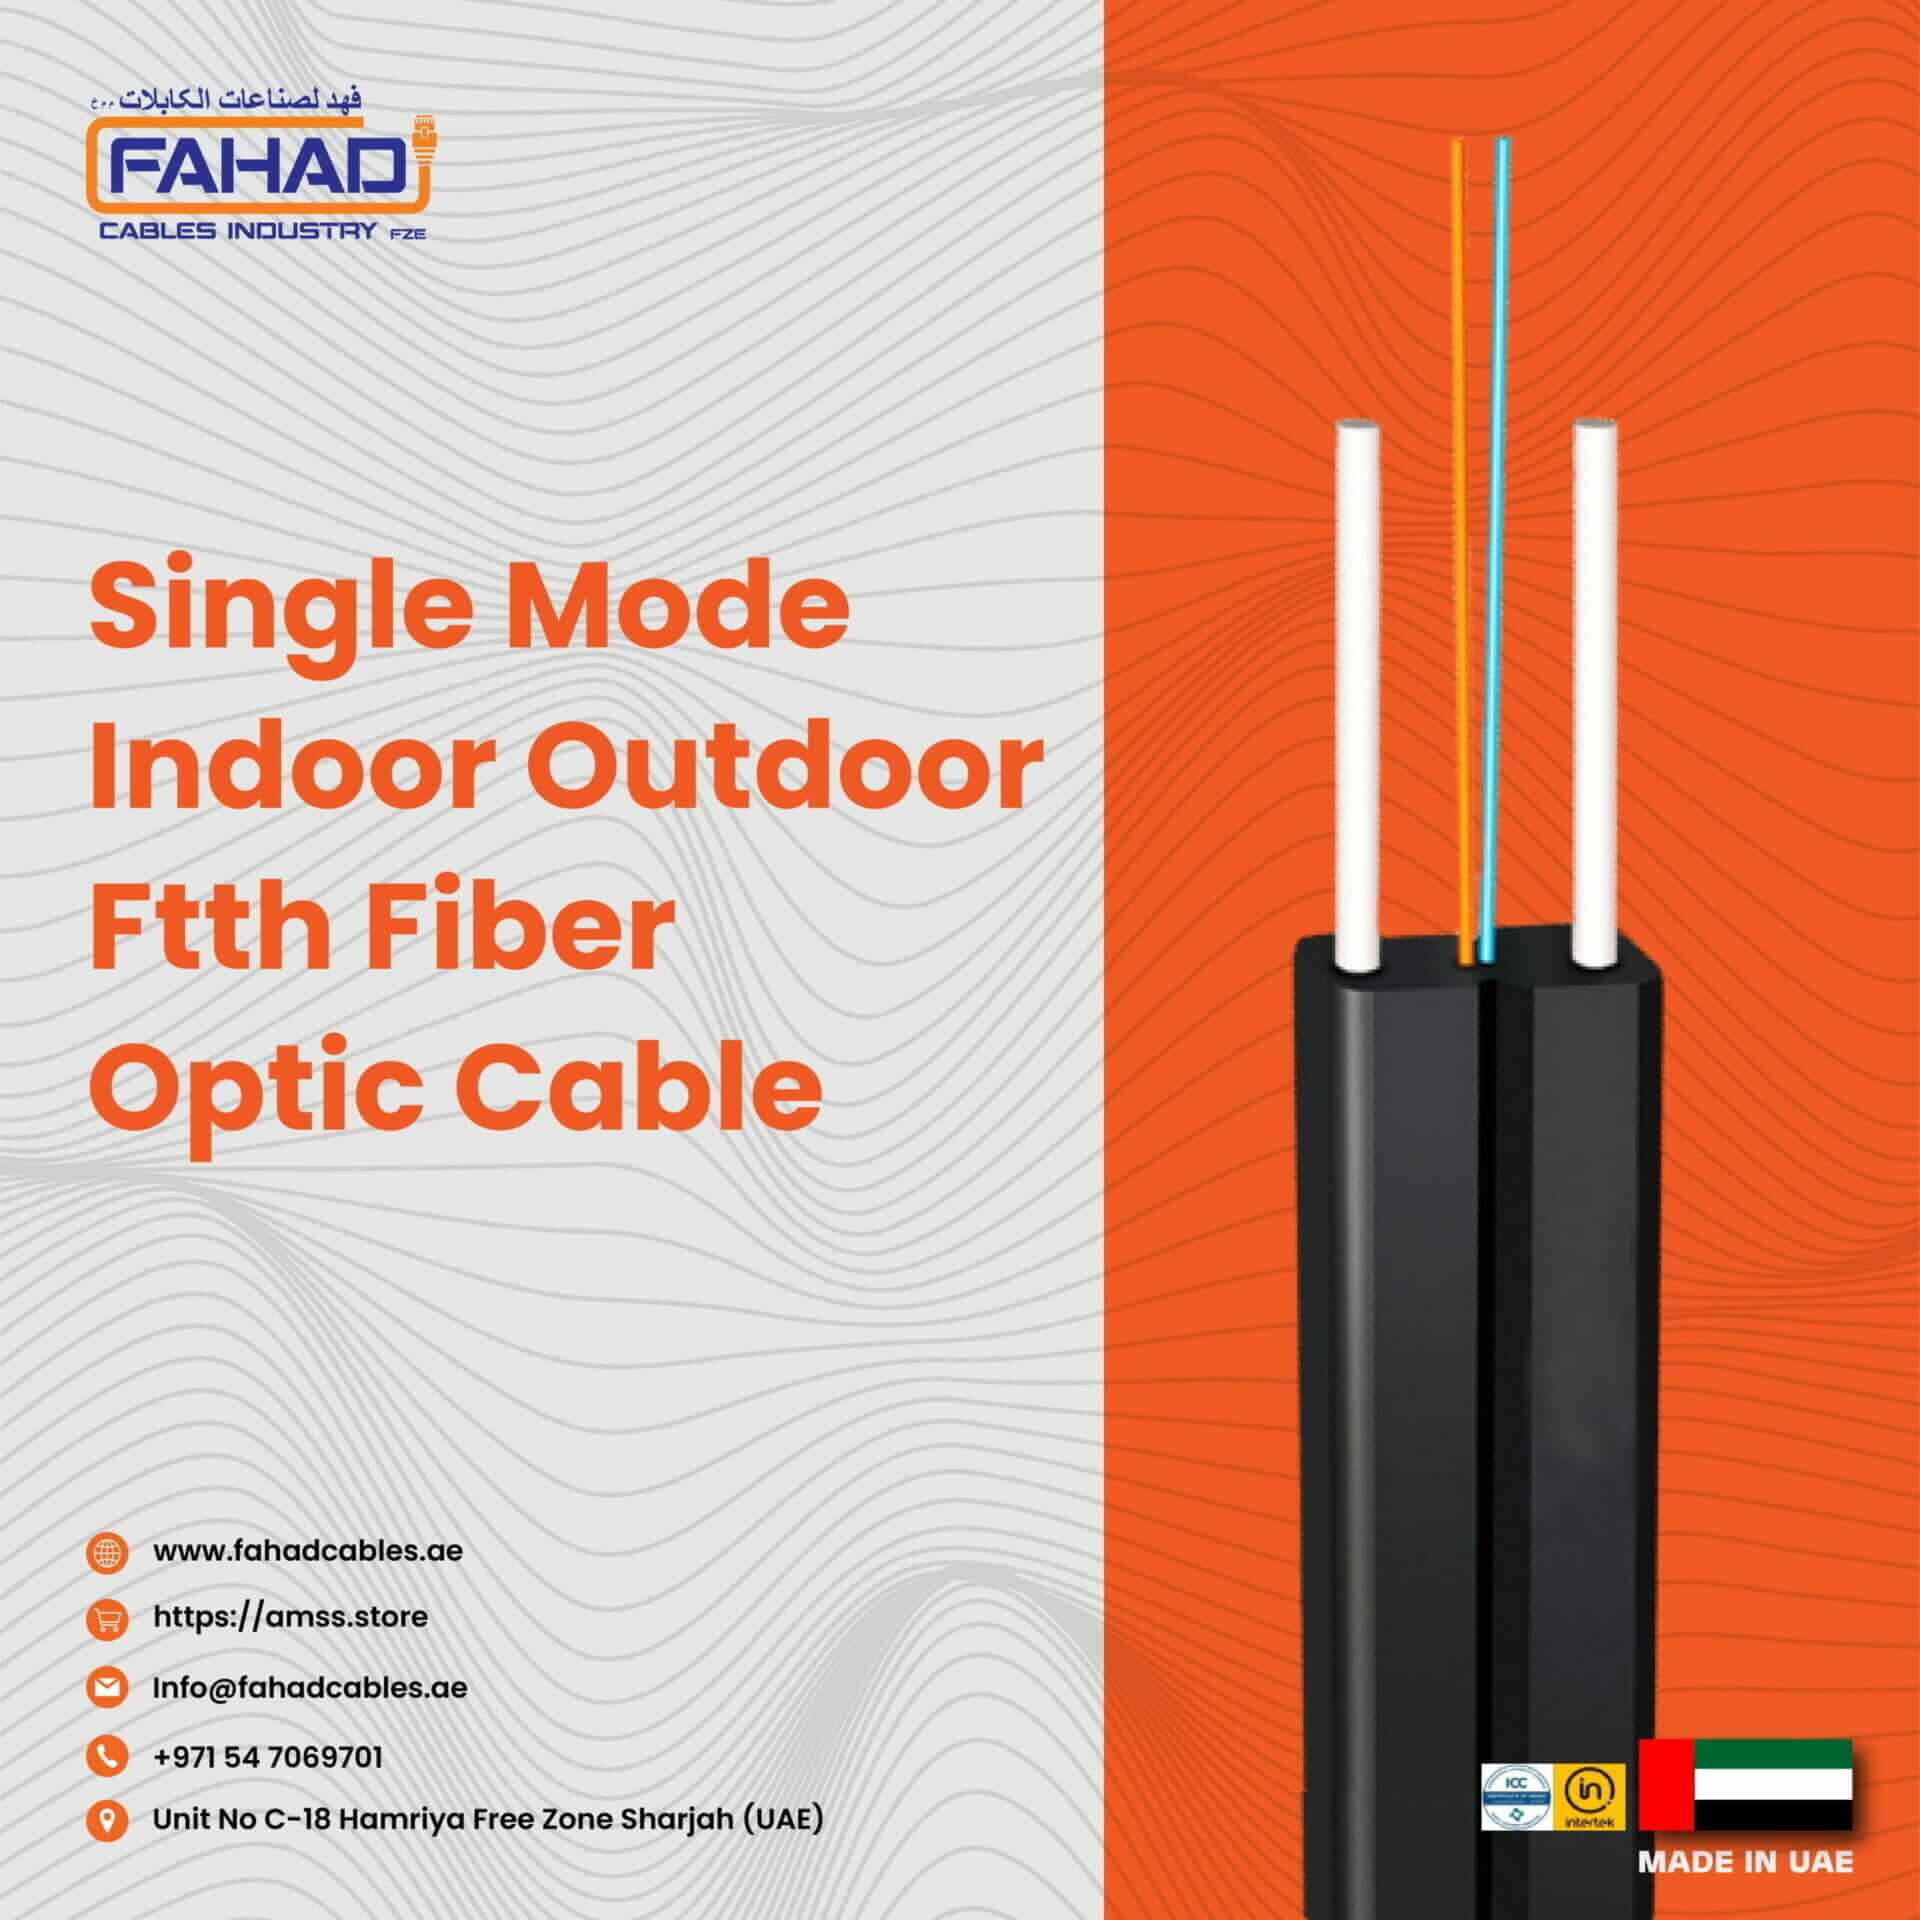 Fiber optic cable, fiber cable, fiber optic cable types, dual core fiber optic cable, single mode fiber optic cable, single mode outdoor fiber cable, multi mode fiber optic cable,os2 fiber optic cable, difference between om2 and om3 fiber cable, fiber cable om3 vs om4,om3 fiber cable,om3 fiber optic cable,om4 fiber optic cable,om4 multimode fiber cables, ftth cable, ftth fiber optic cable, ftth cable connection, ftth cable type, multi core fiber cable